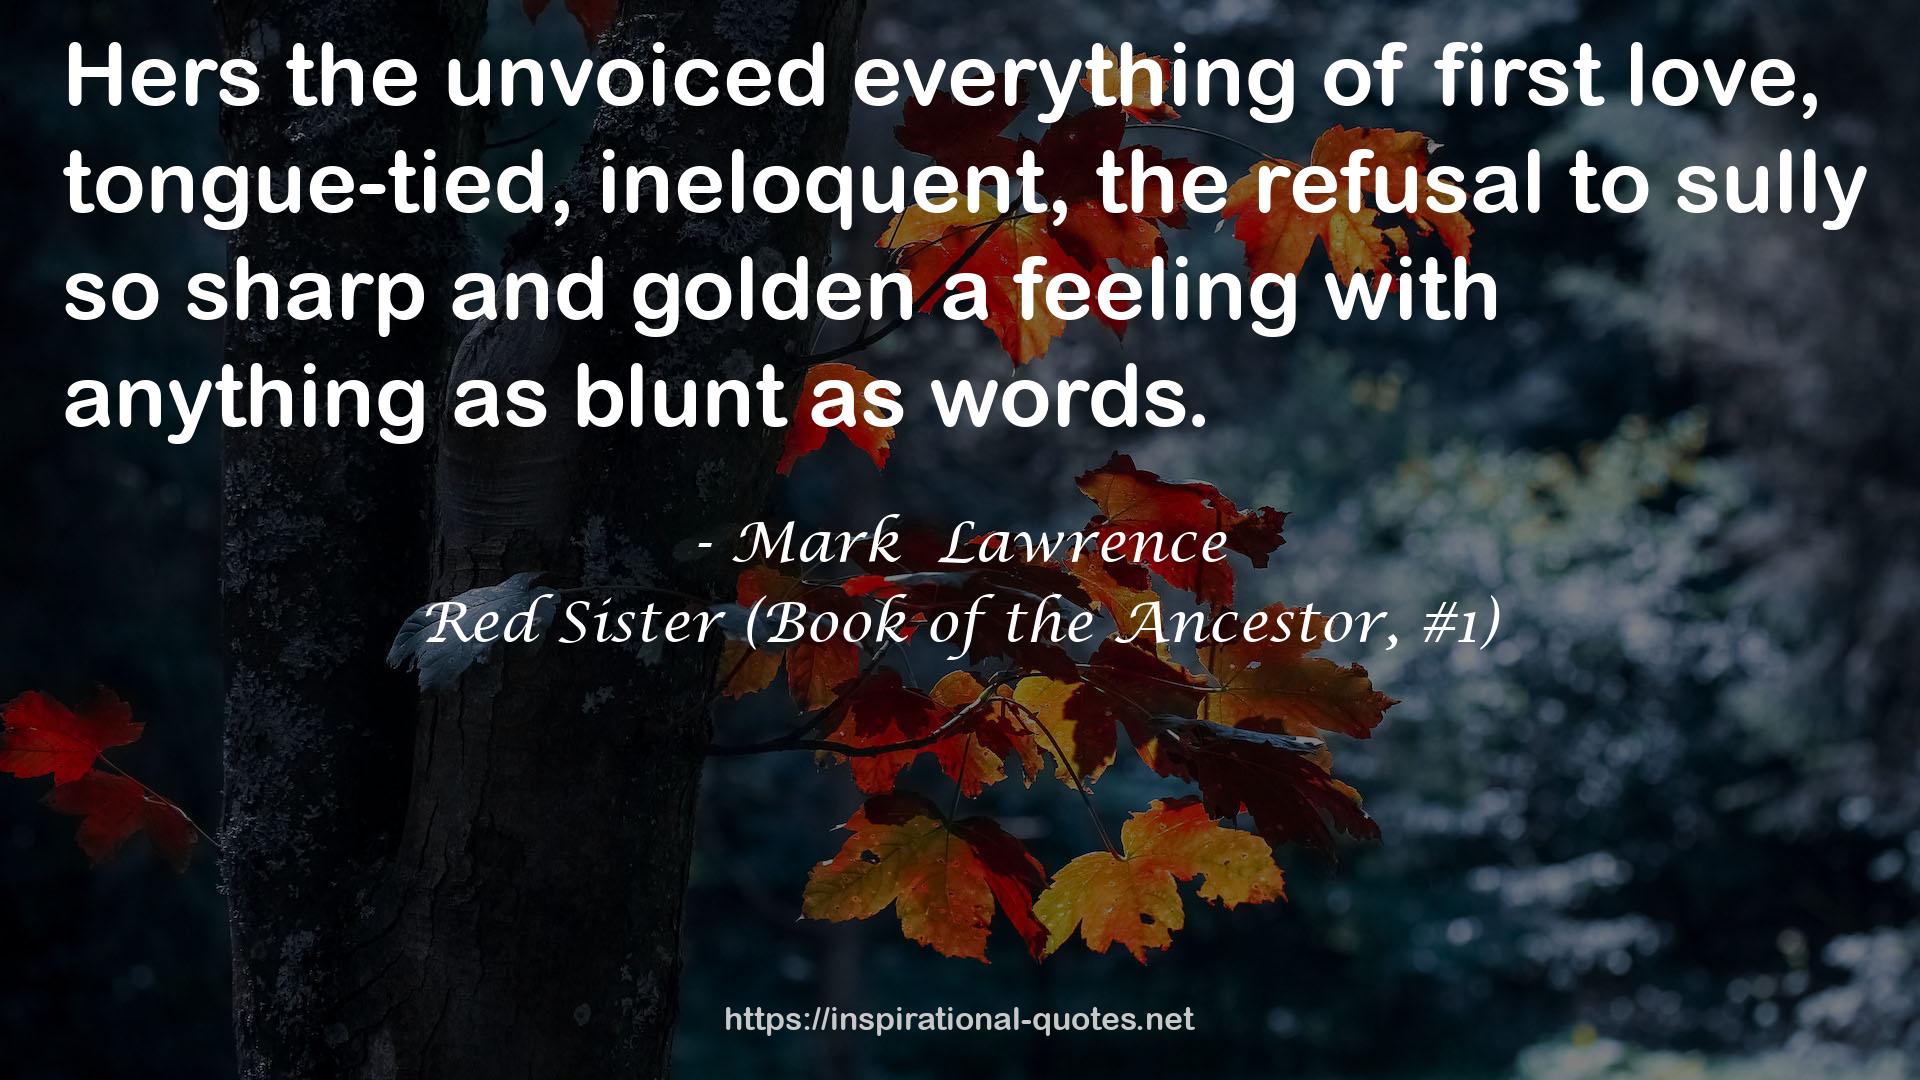 Red Sister (Book of the Ancestor, #1) QUOTES